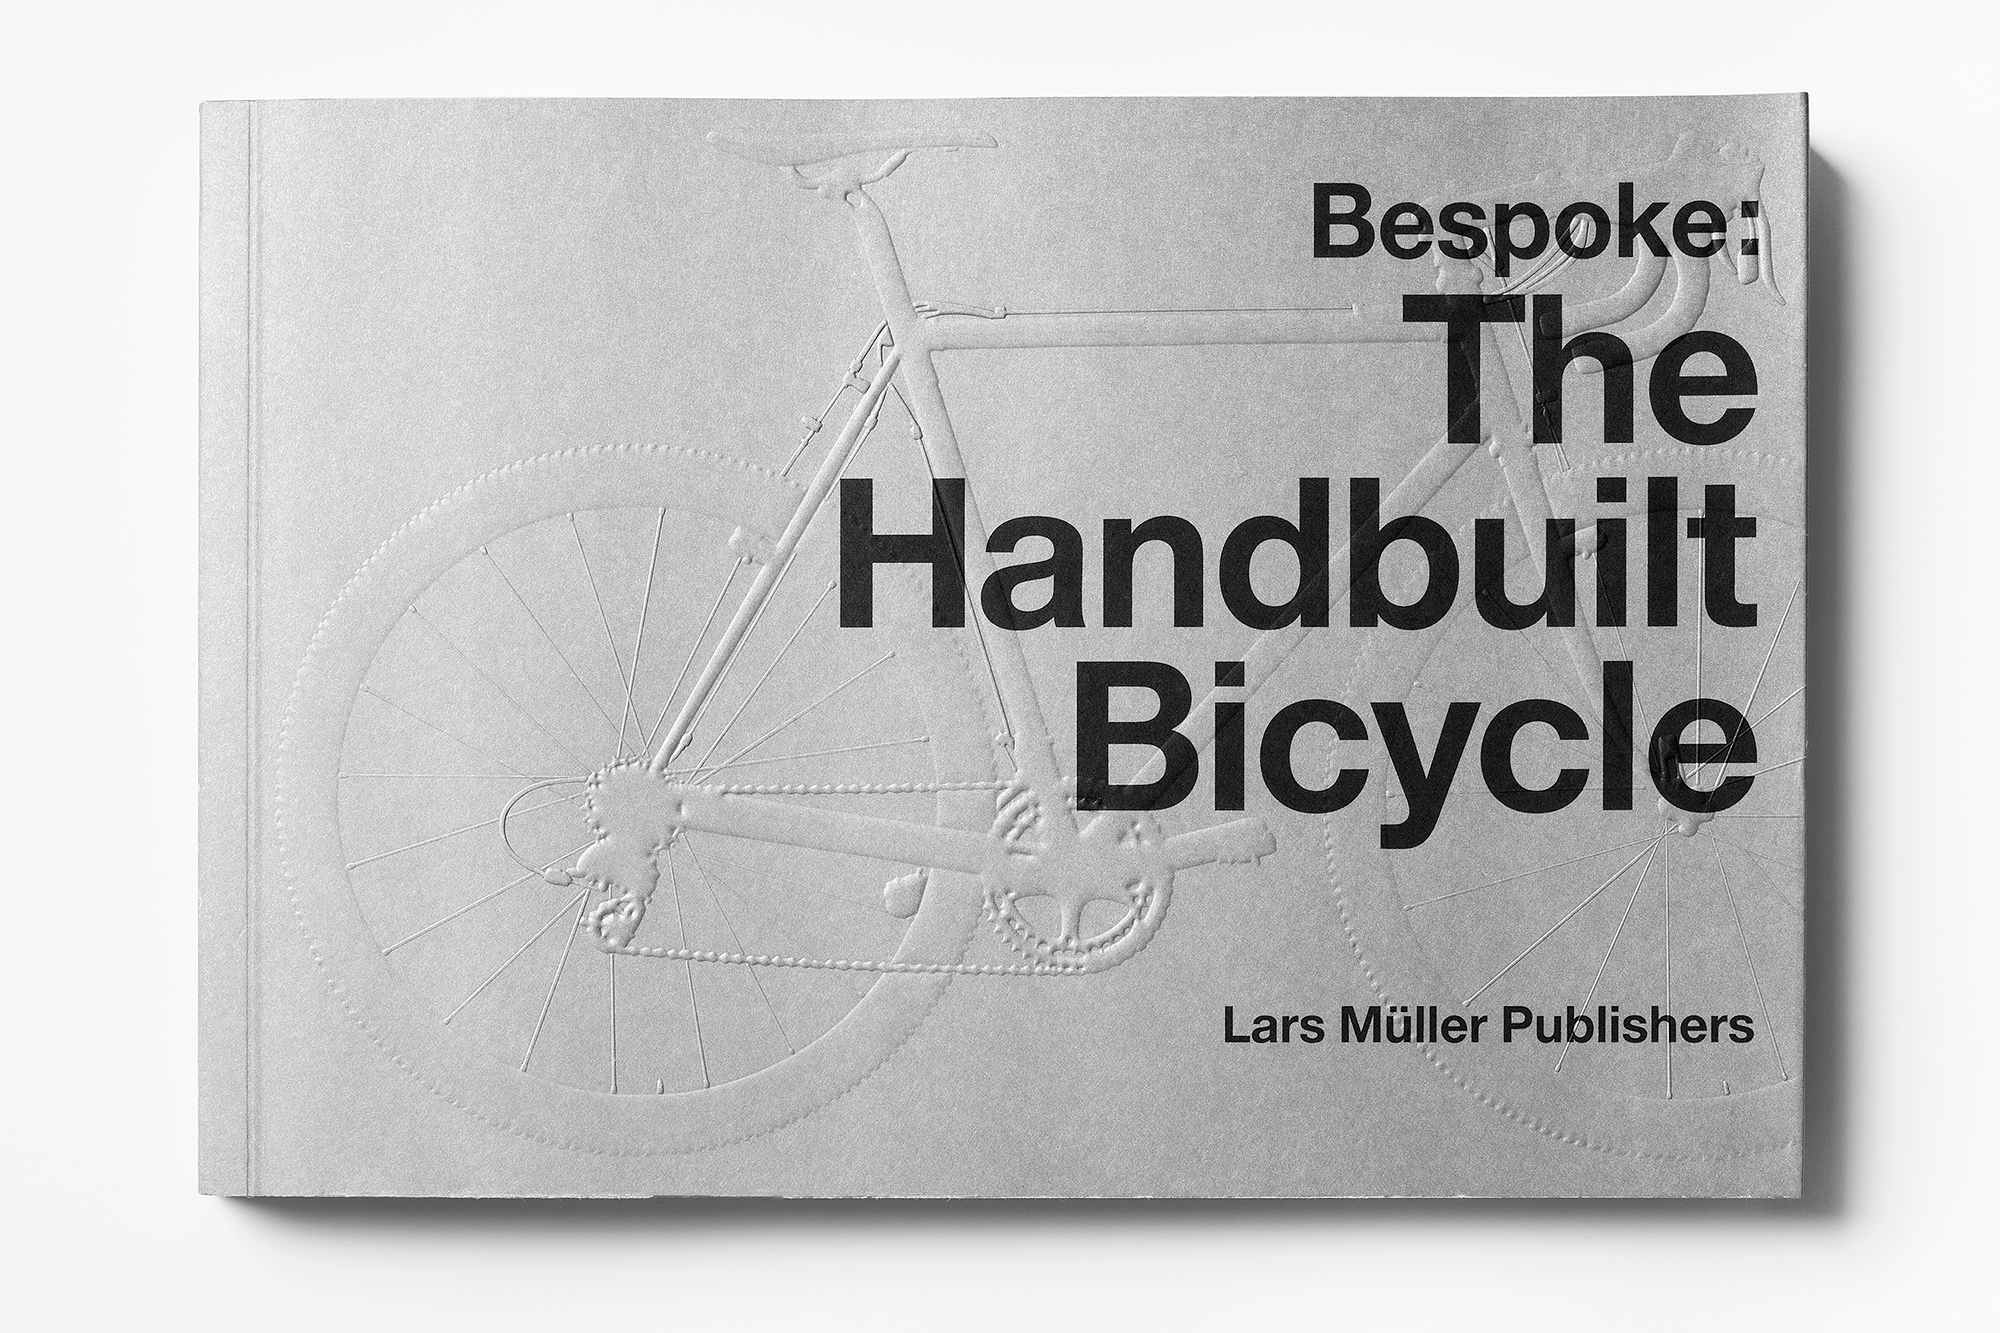 Bespoke: The Handbuilt Bicycle, Museum of Arts and Design New York City